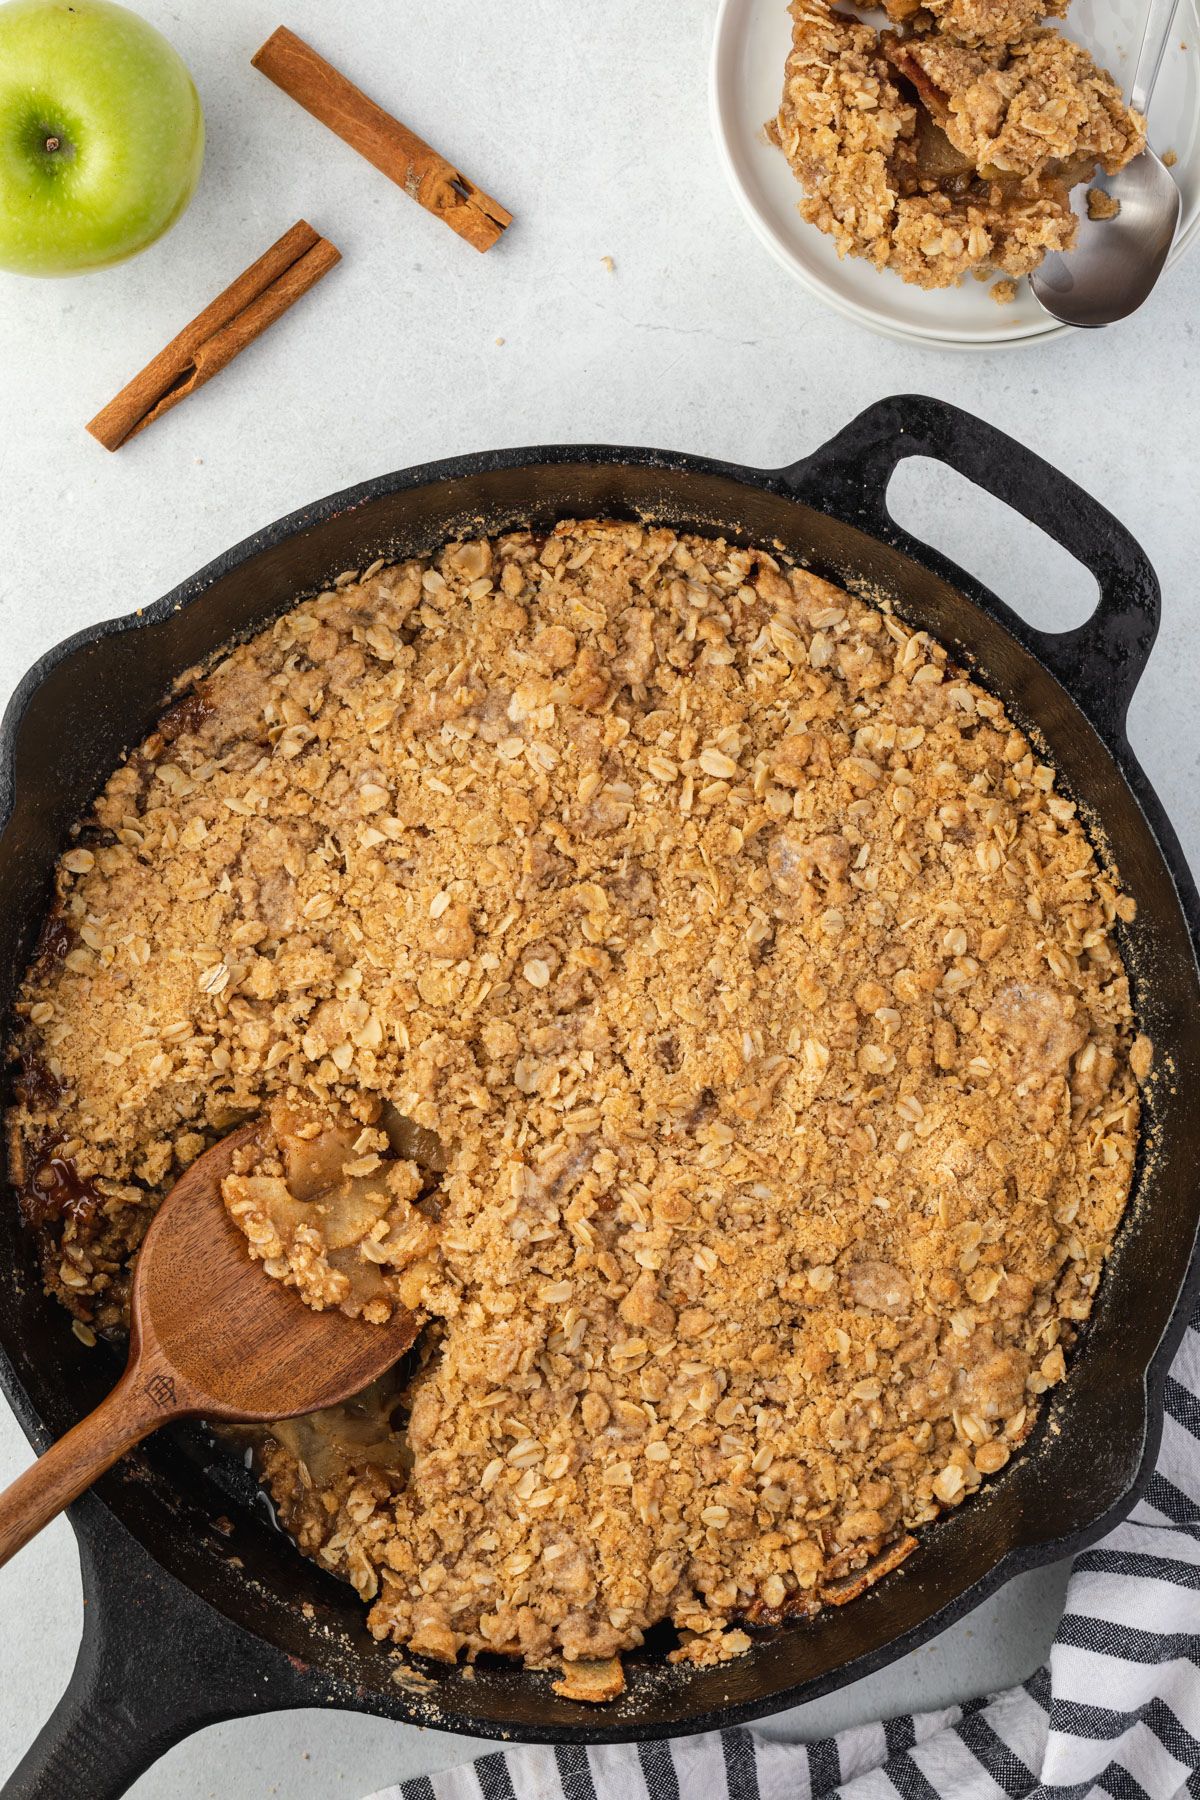 Baked apples slices with a crumbling oat topping baked in a black cast iron skillet with a wooden spoon scooping out some apple crisp.